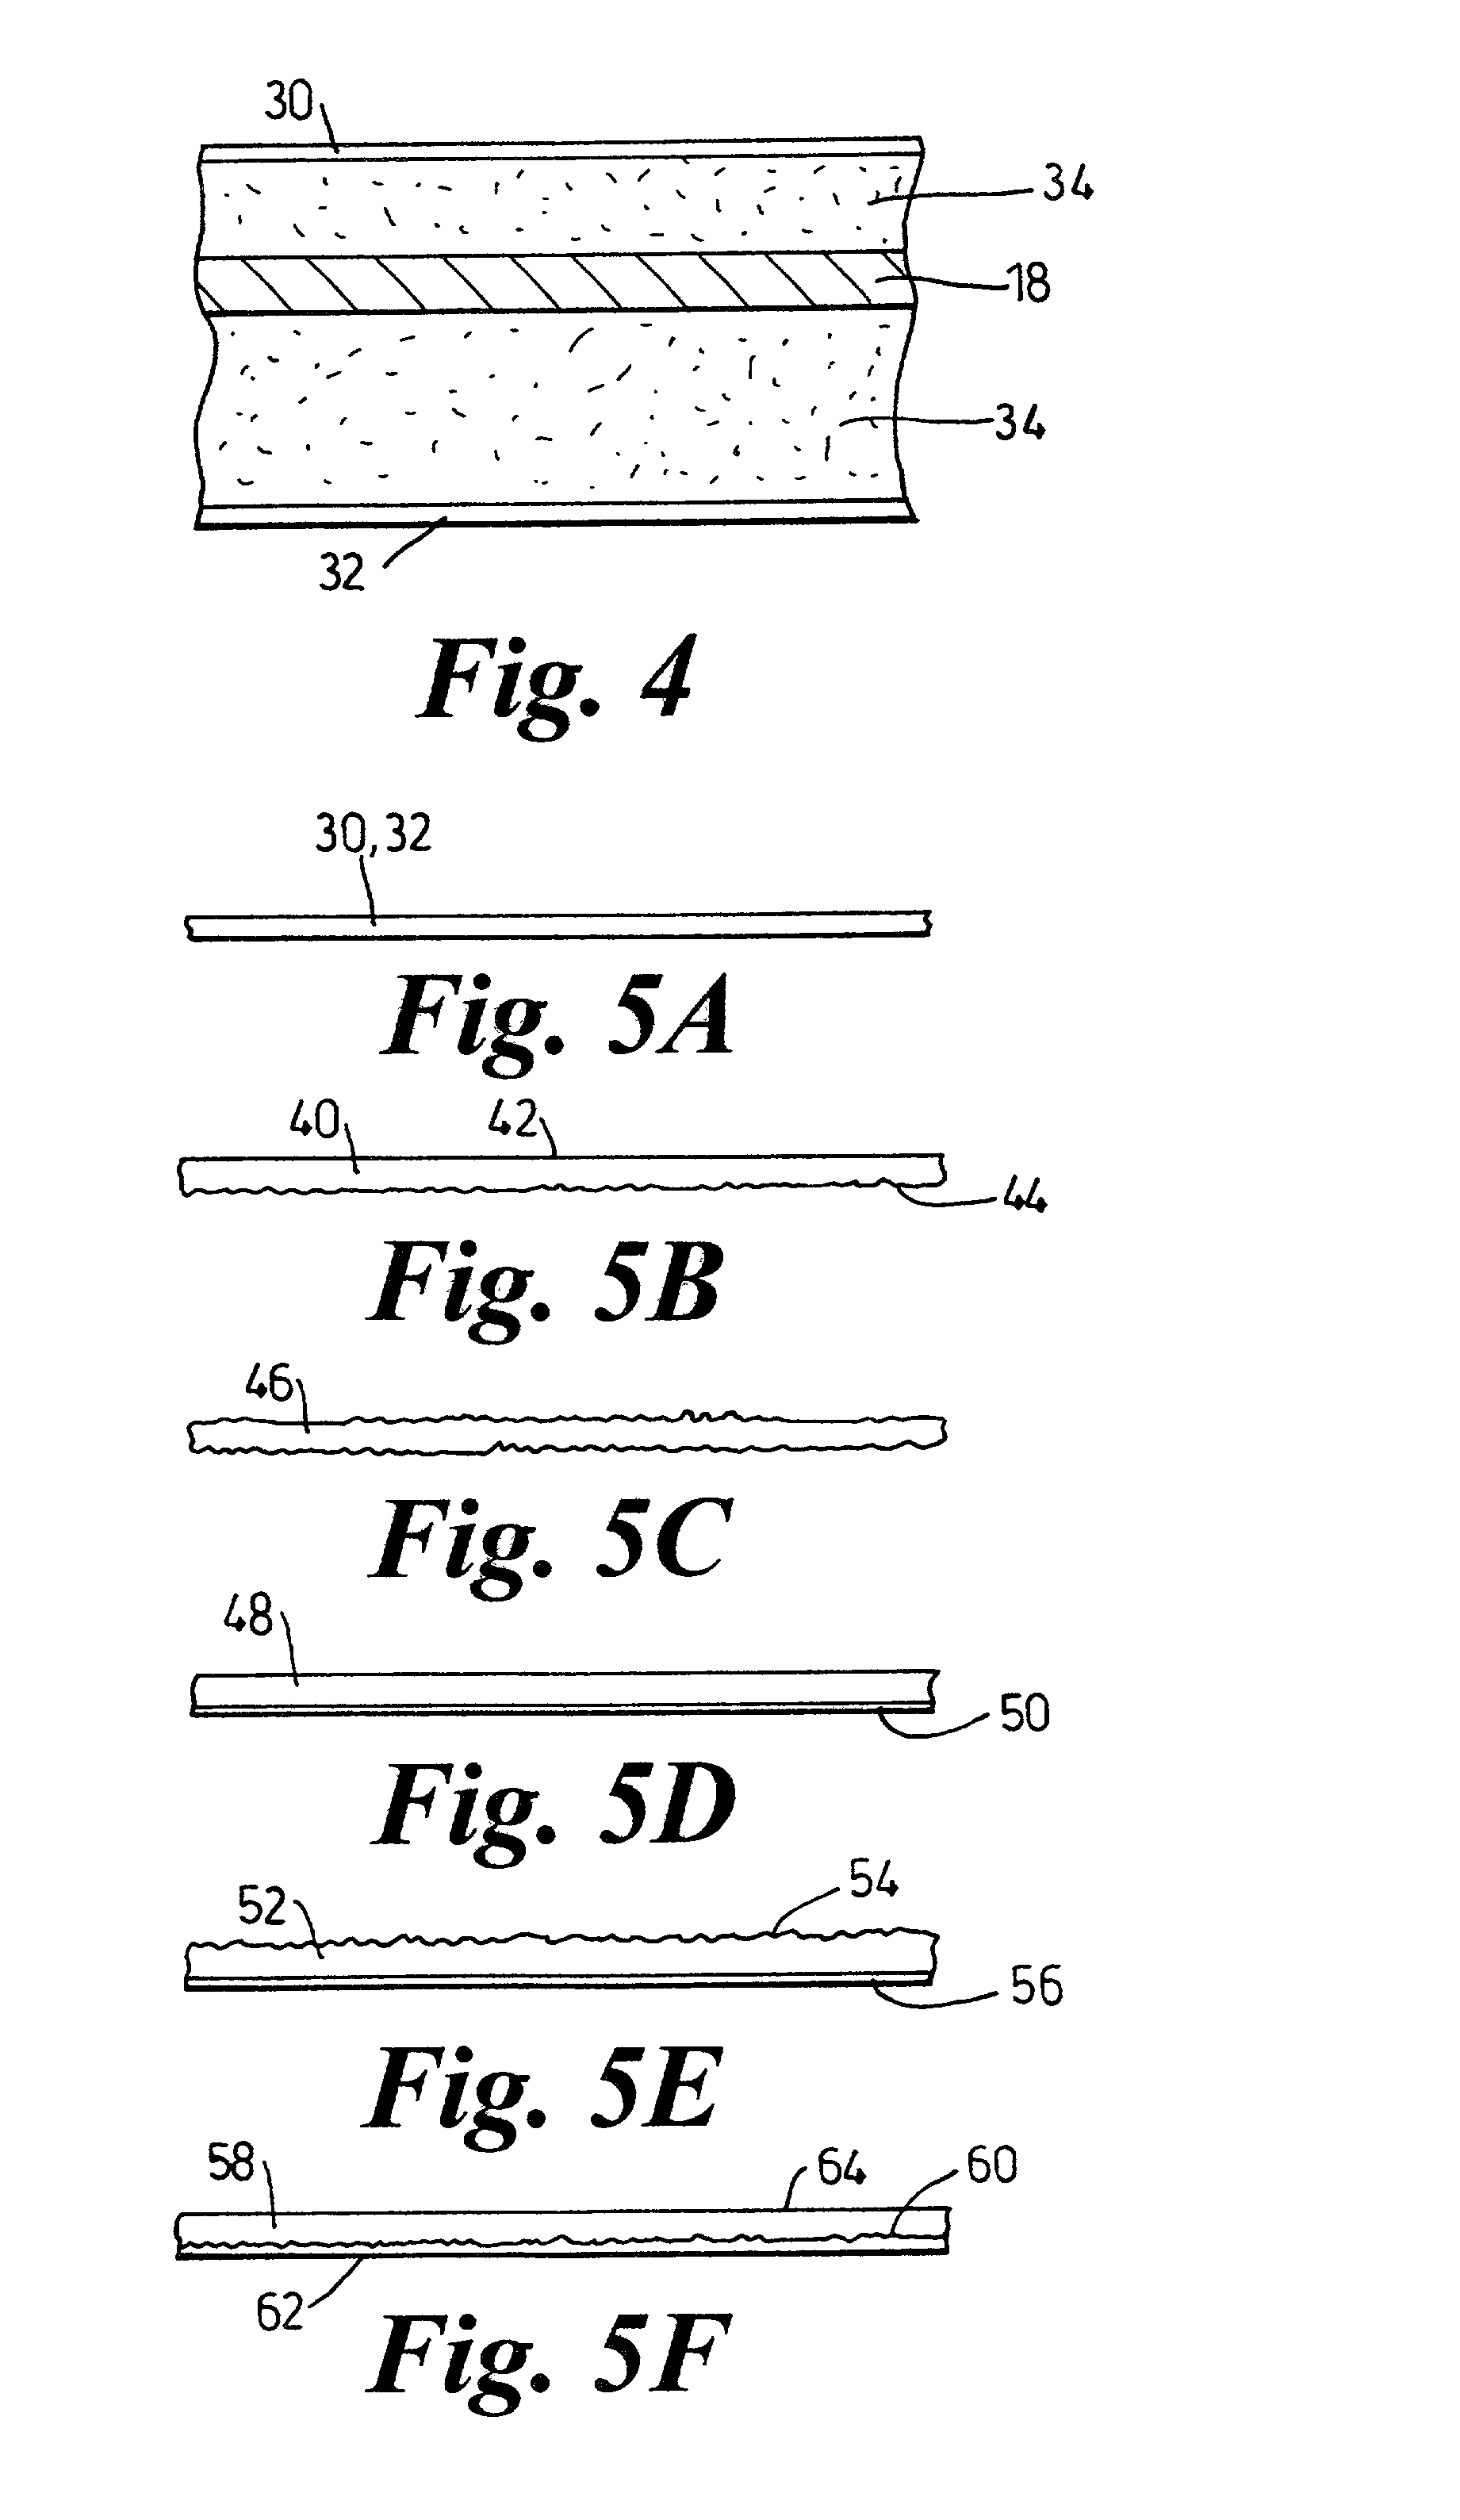 Tamper-evident and/or tamper-resistant electronic components